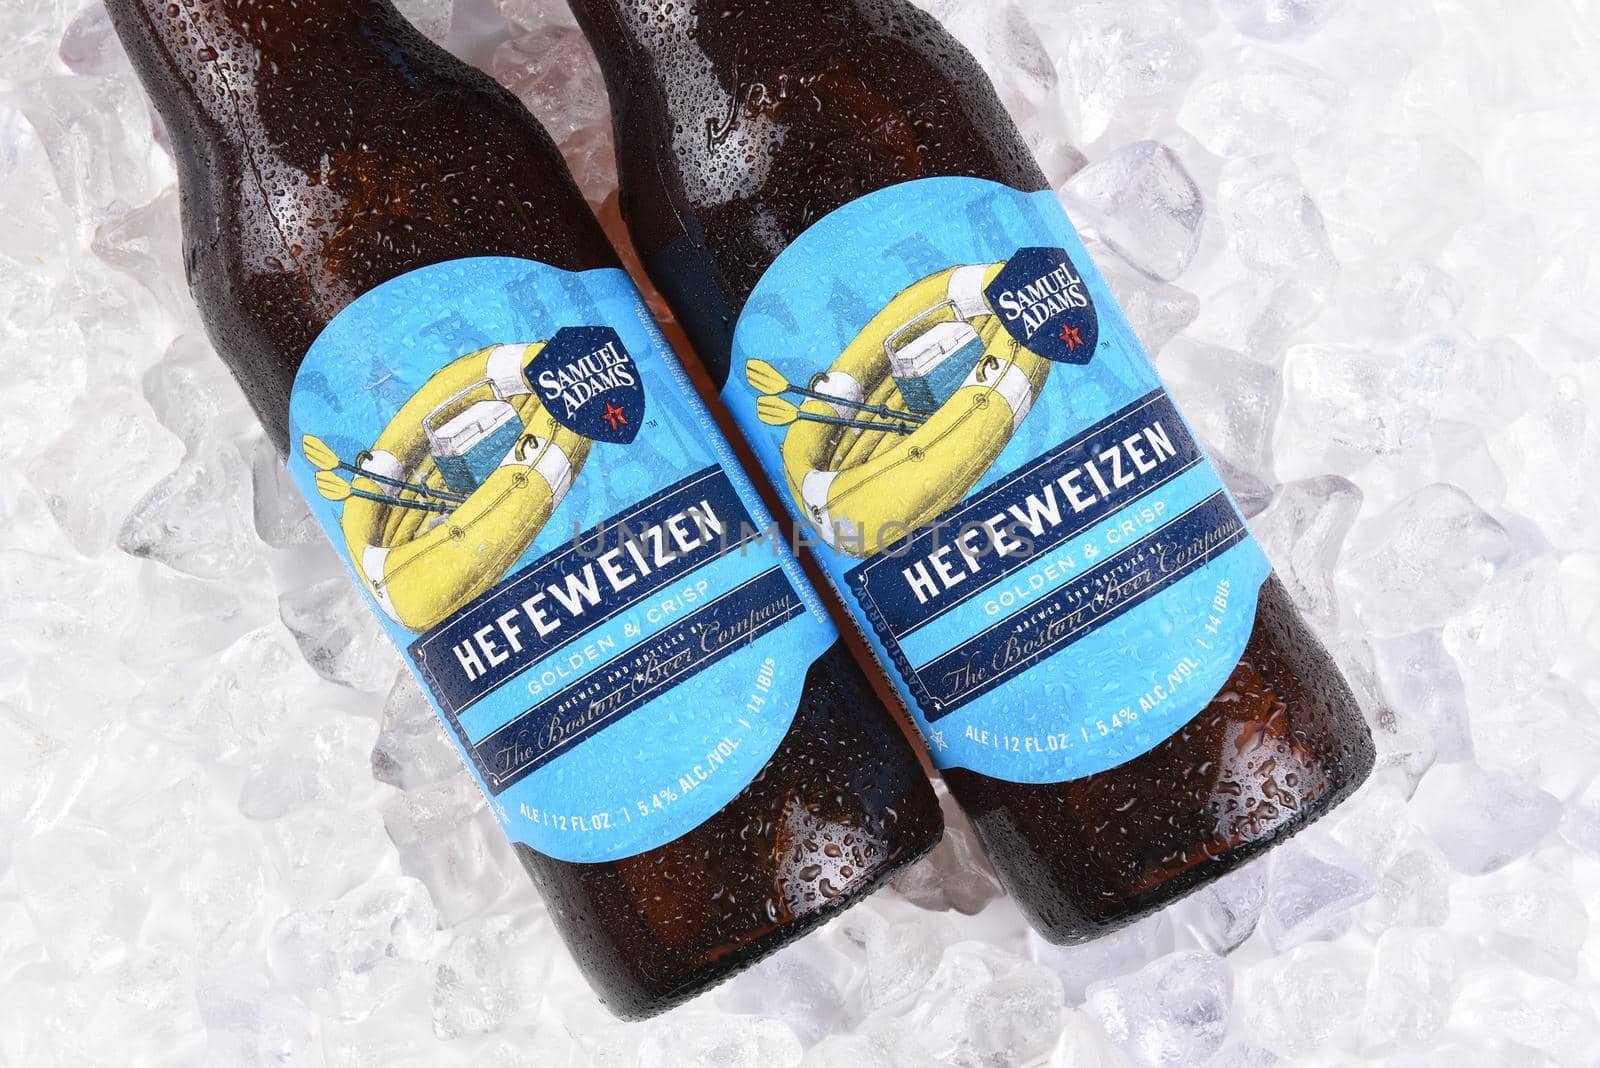 IRVINE, CA - JULY 16, 2017: Samuel Adams Hefeweizen bottle on ice. From the Boston Beer Company. Based on sales in 2016, it is the second largest craft brewery in the U.S.